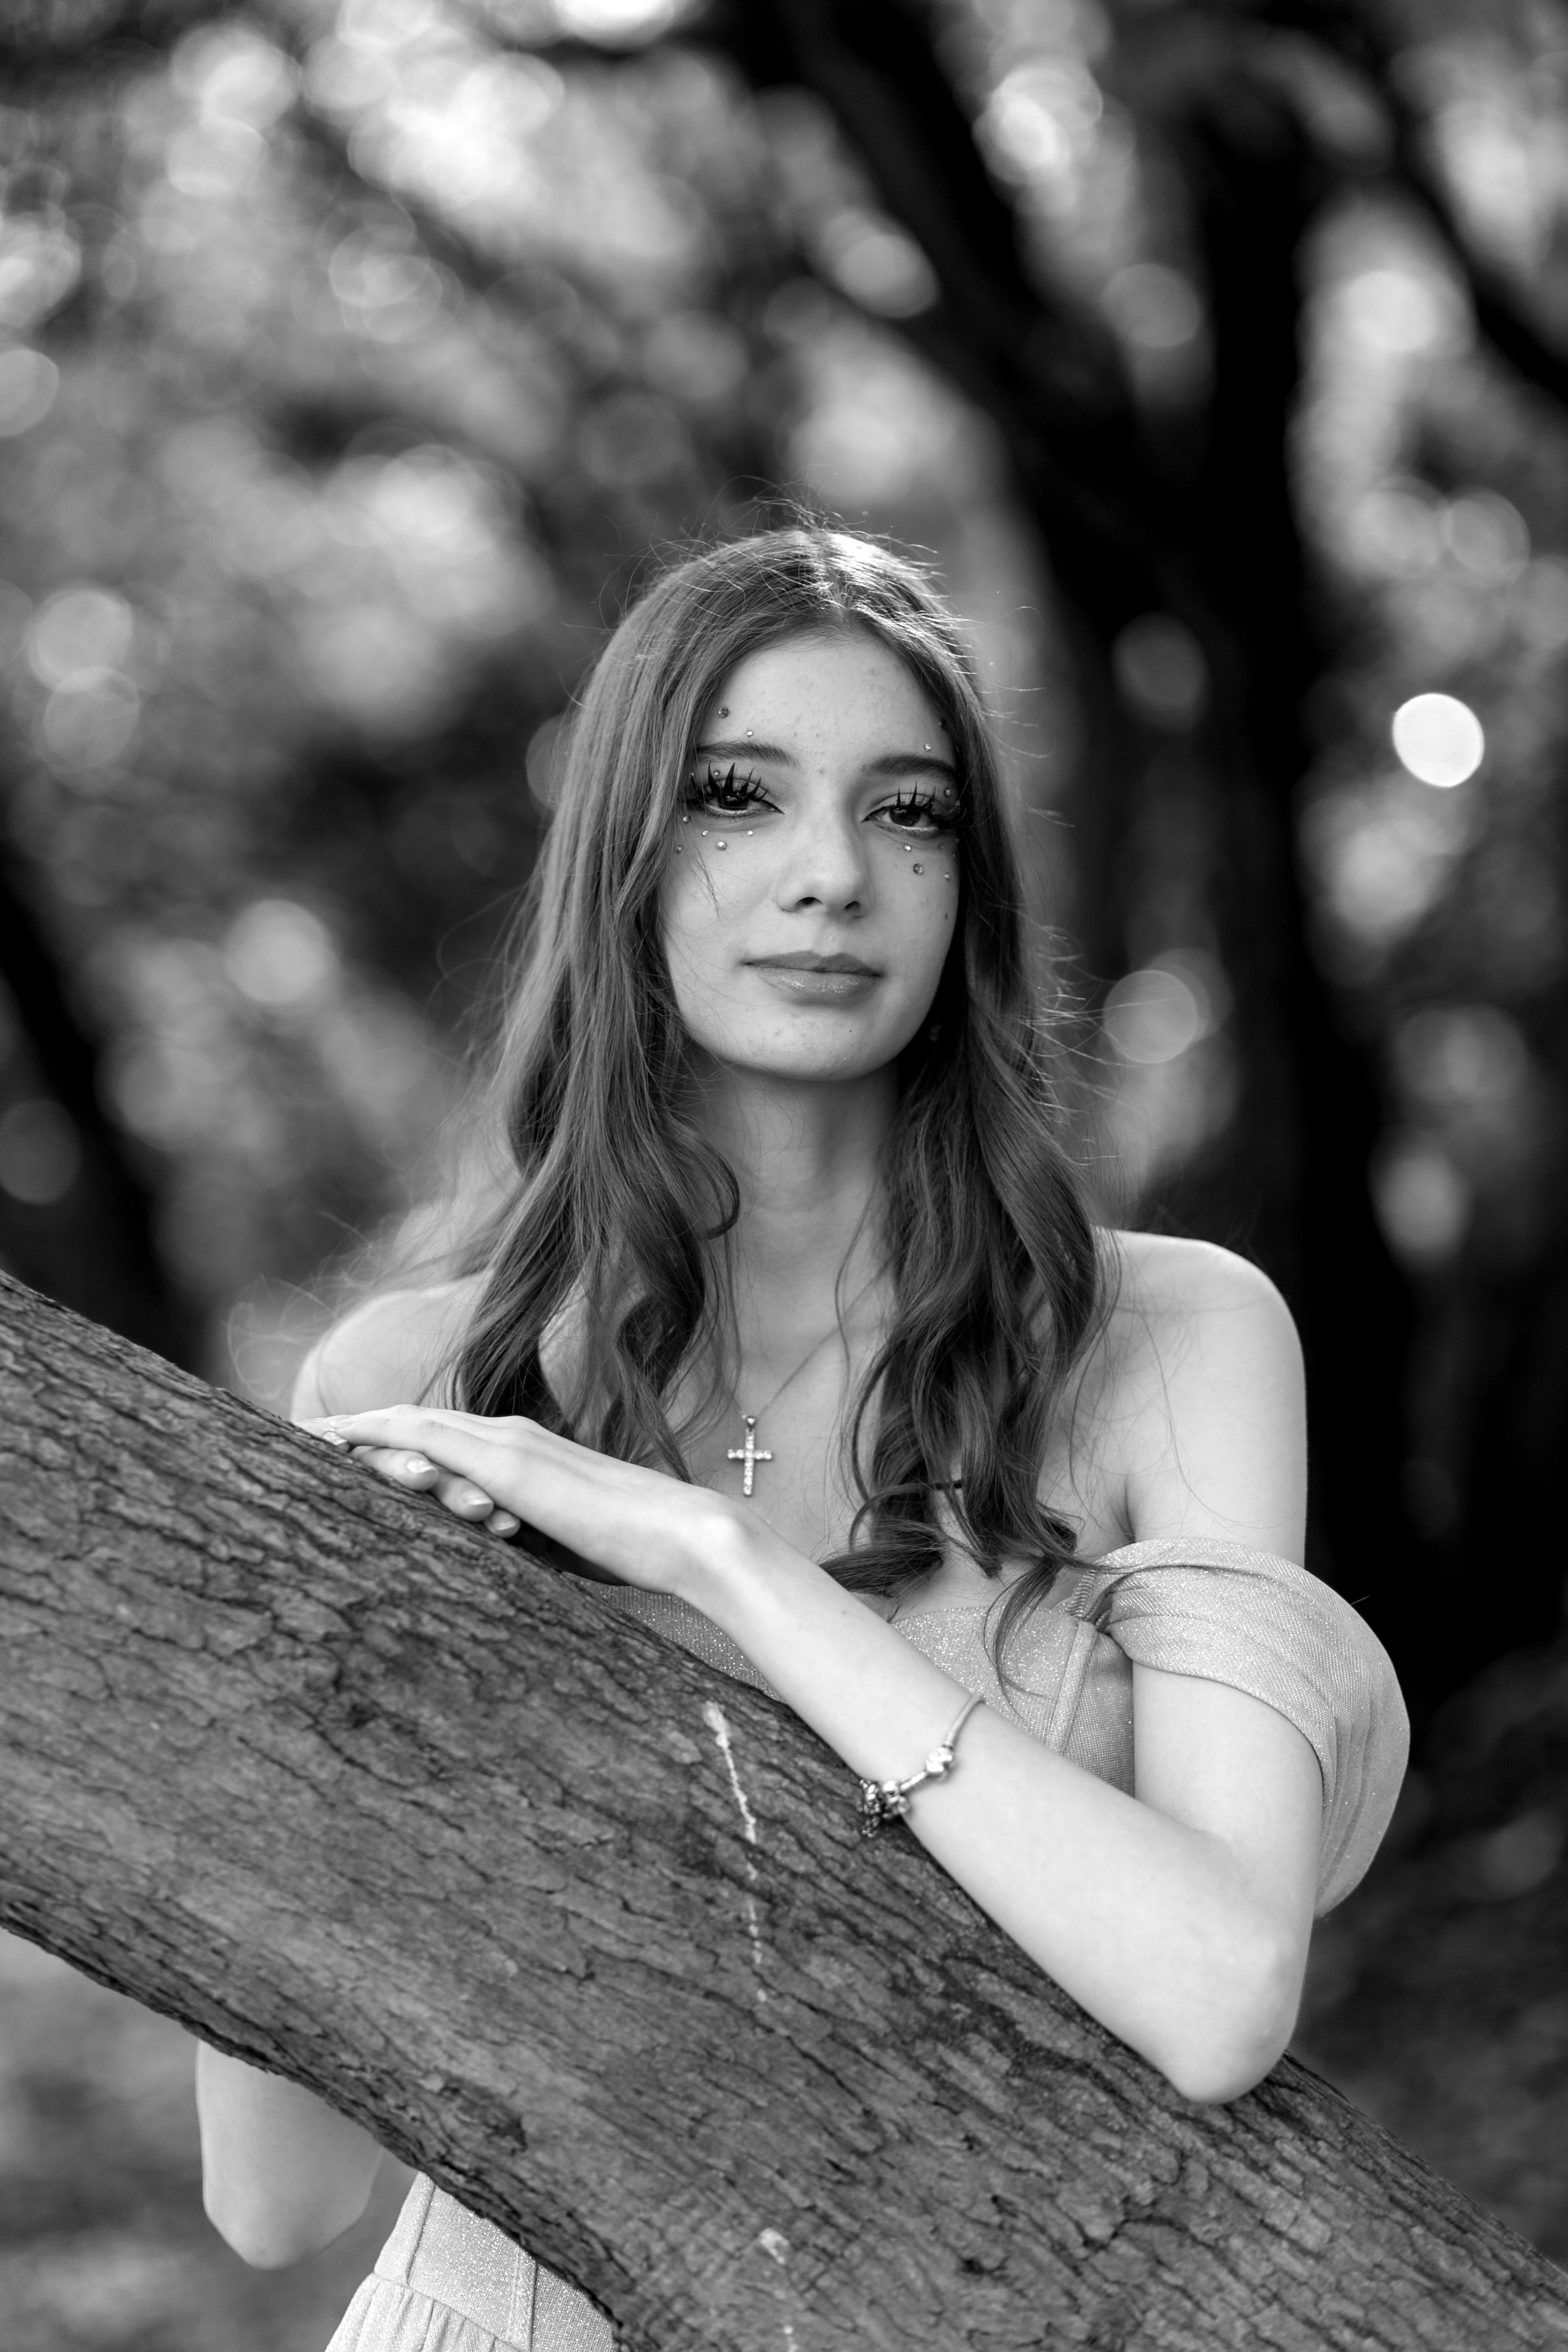 A woman posing by a tree in a park | Source: Pexels